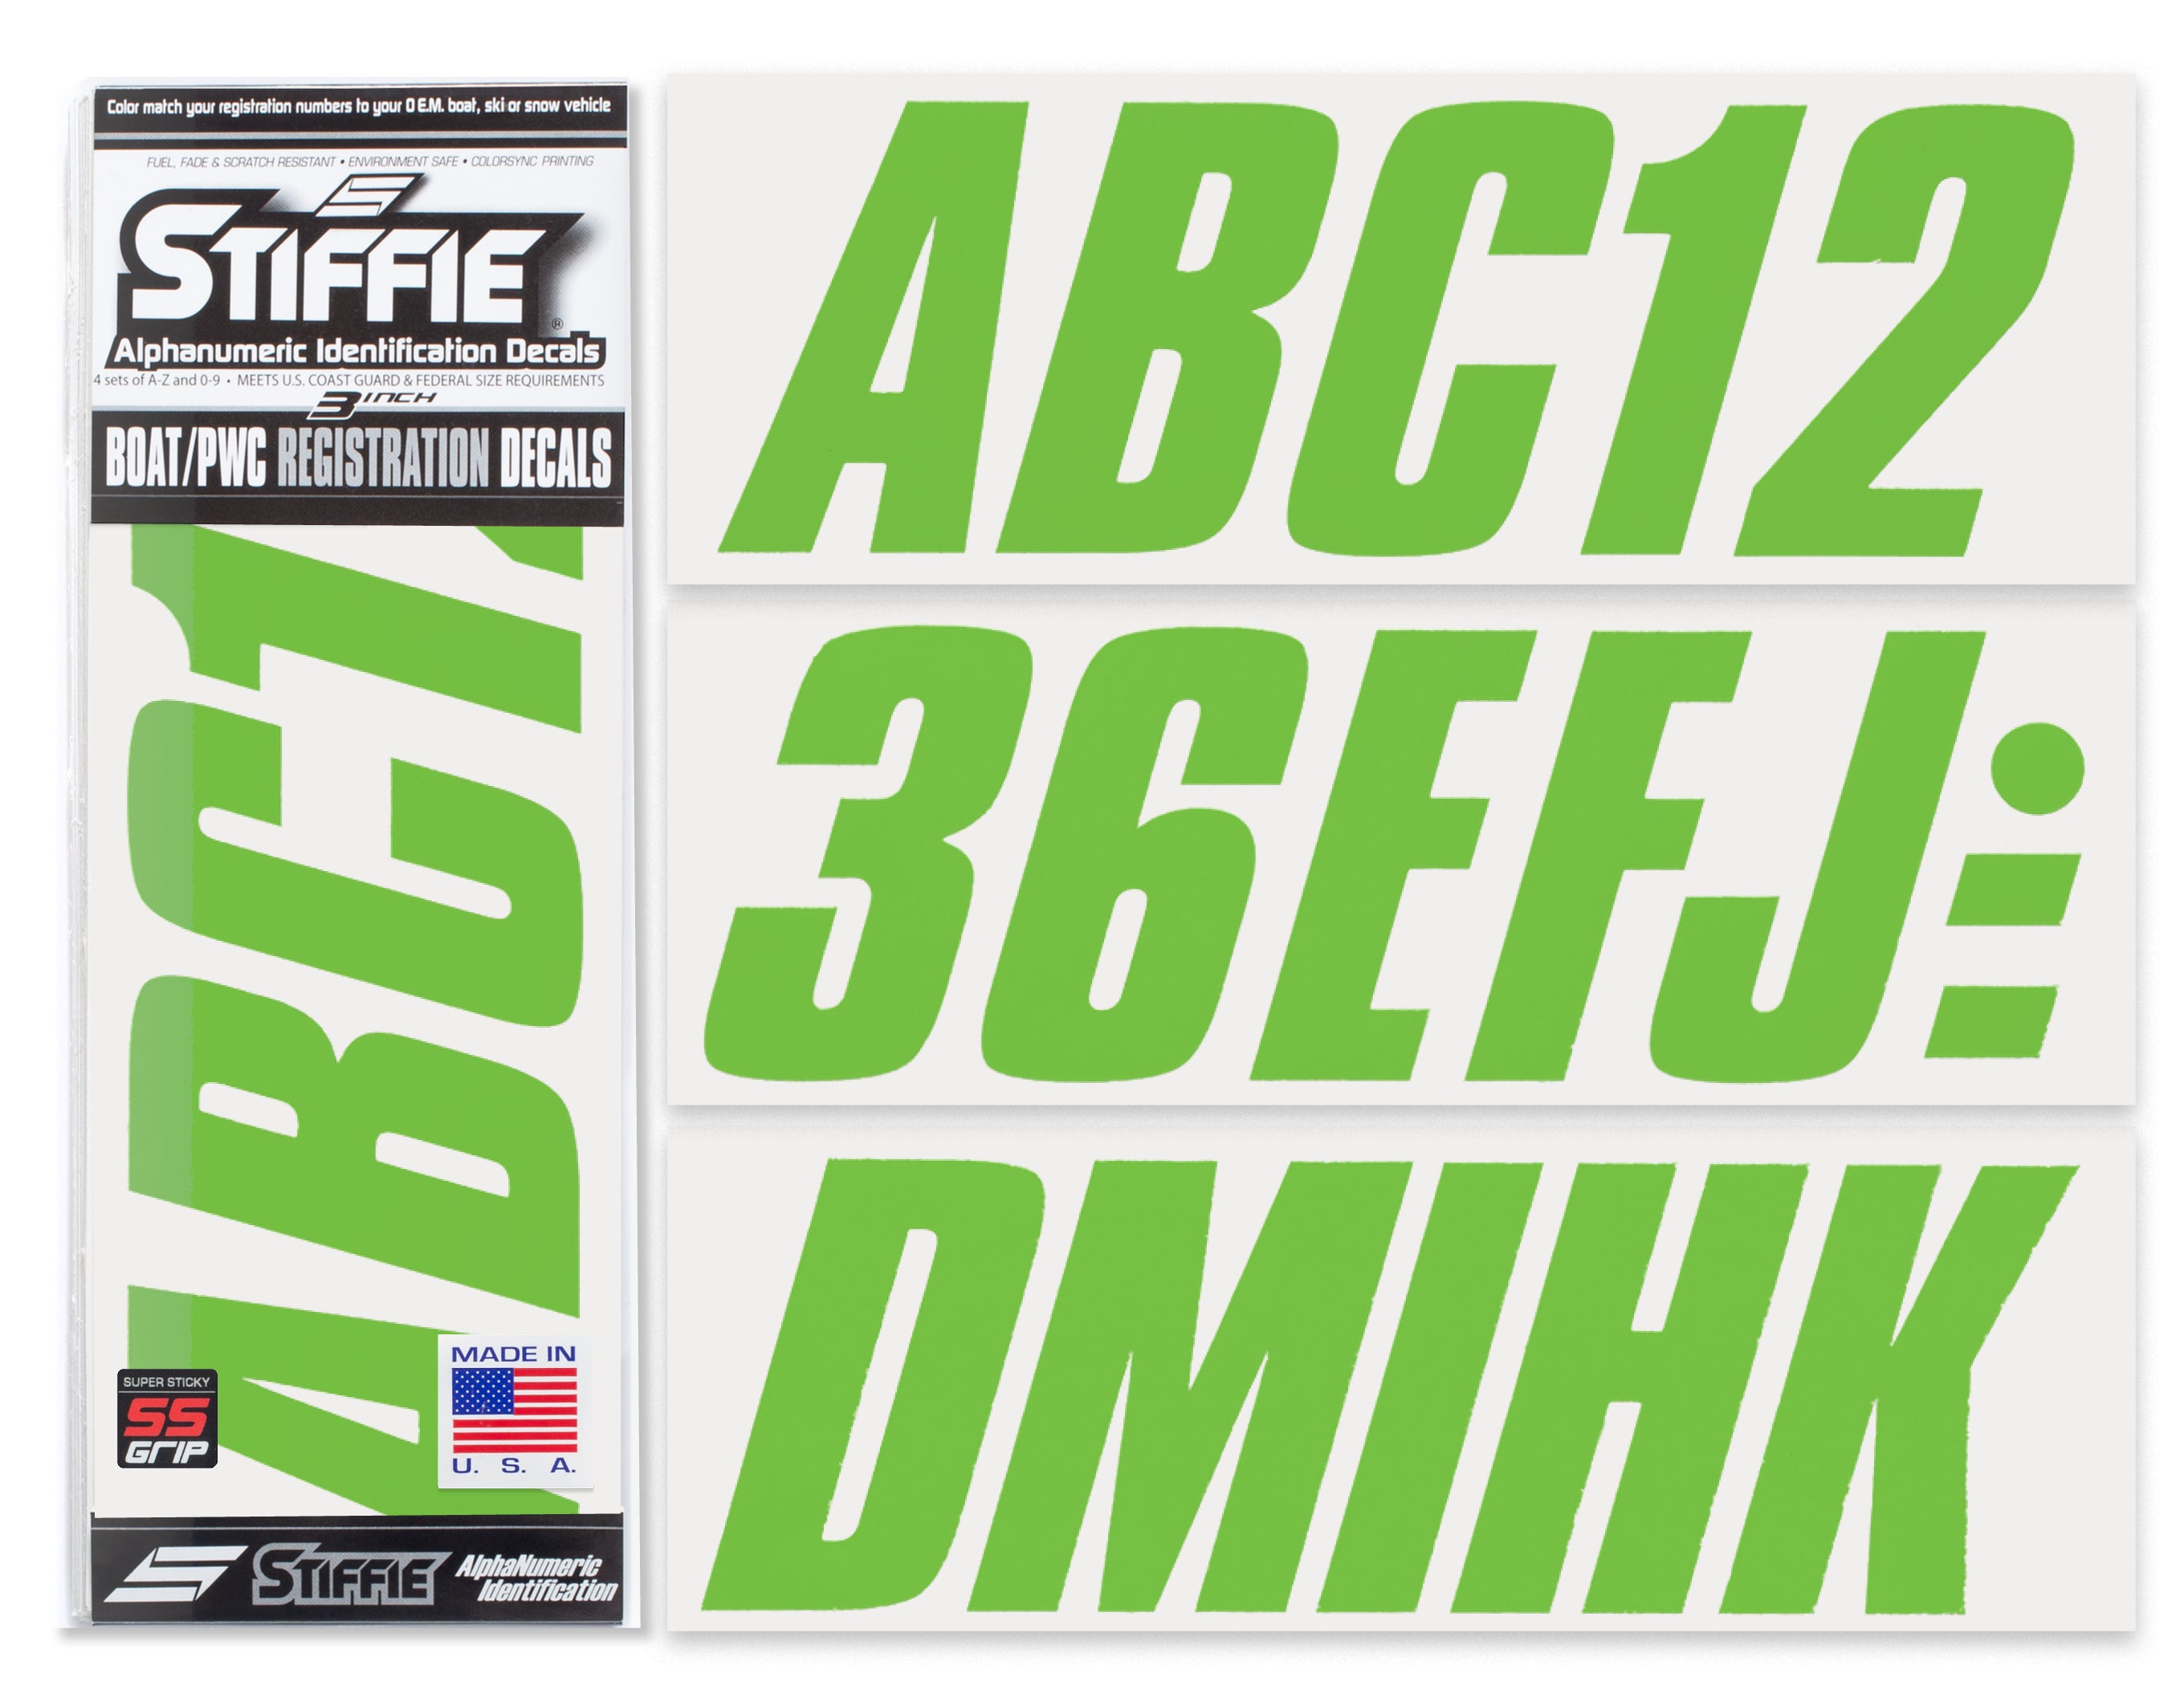 STIFFIE Shift Team Green Super Sticky 3" Alpha Numeric Registration Identification Numbers Stickers Decals for Sea-Doo Spark, Inflatable Boats, Ribs, Hypalon/PVC, PWC and Boats.